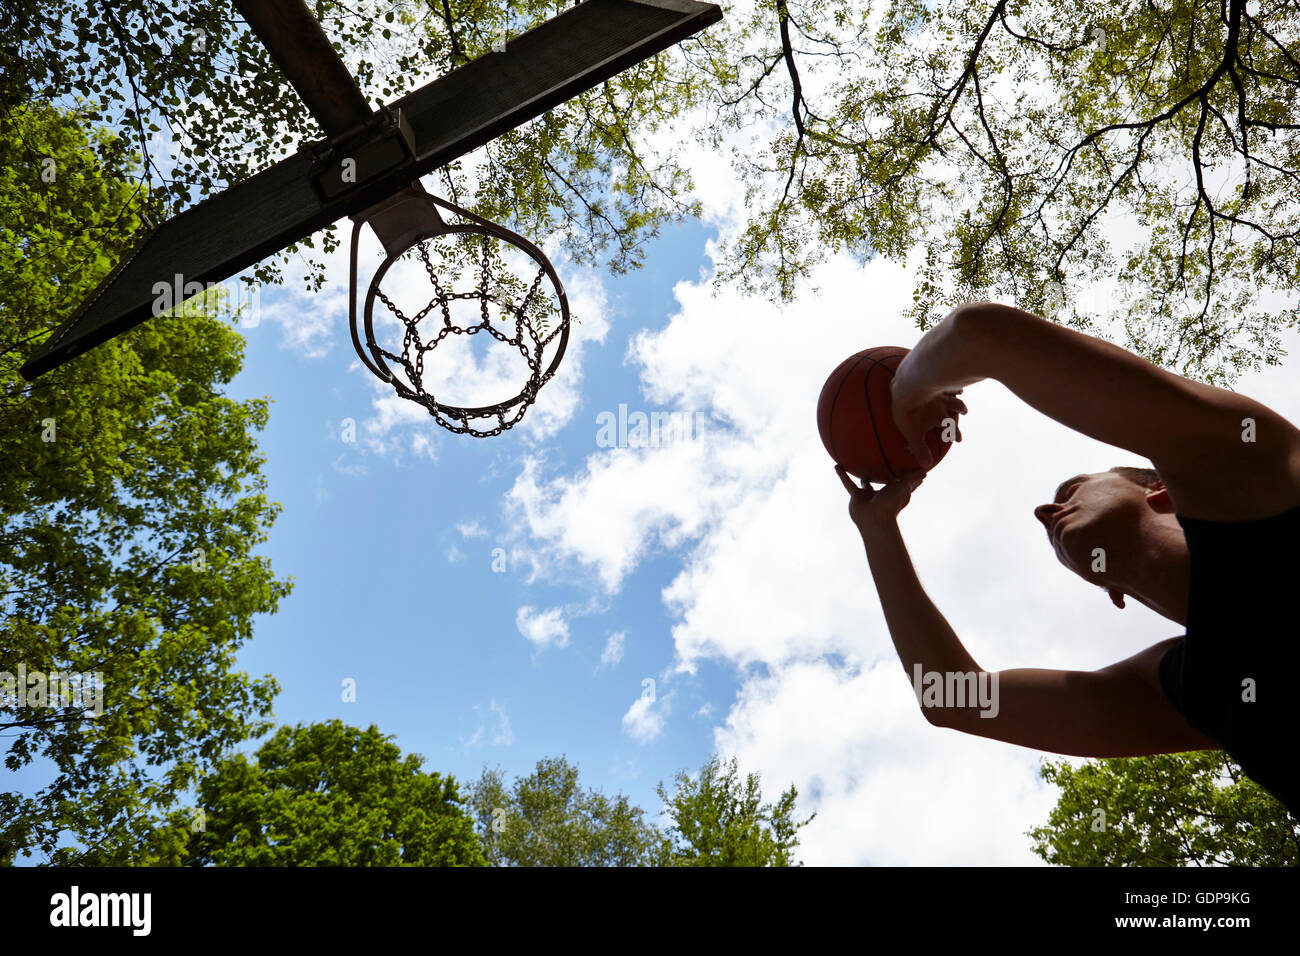 Low angle view of silhouetted young man aiming ball at basketball hoop Stock Photo